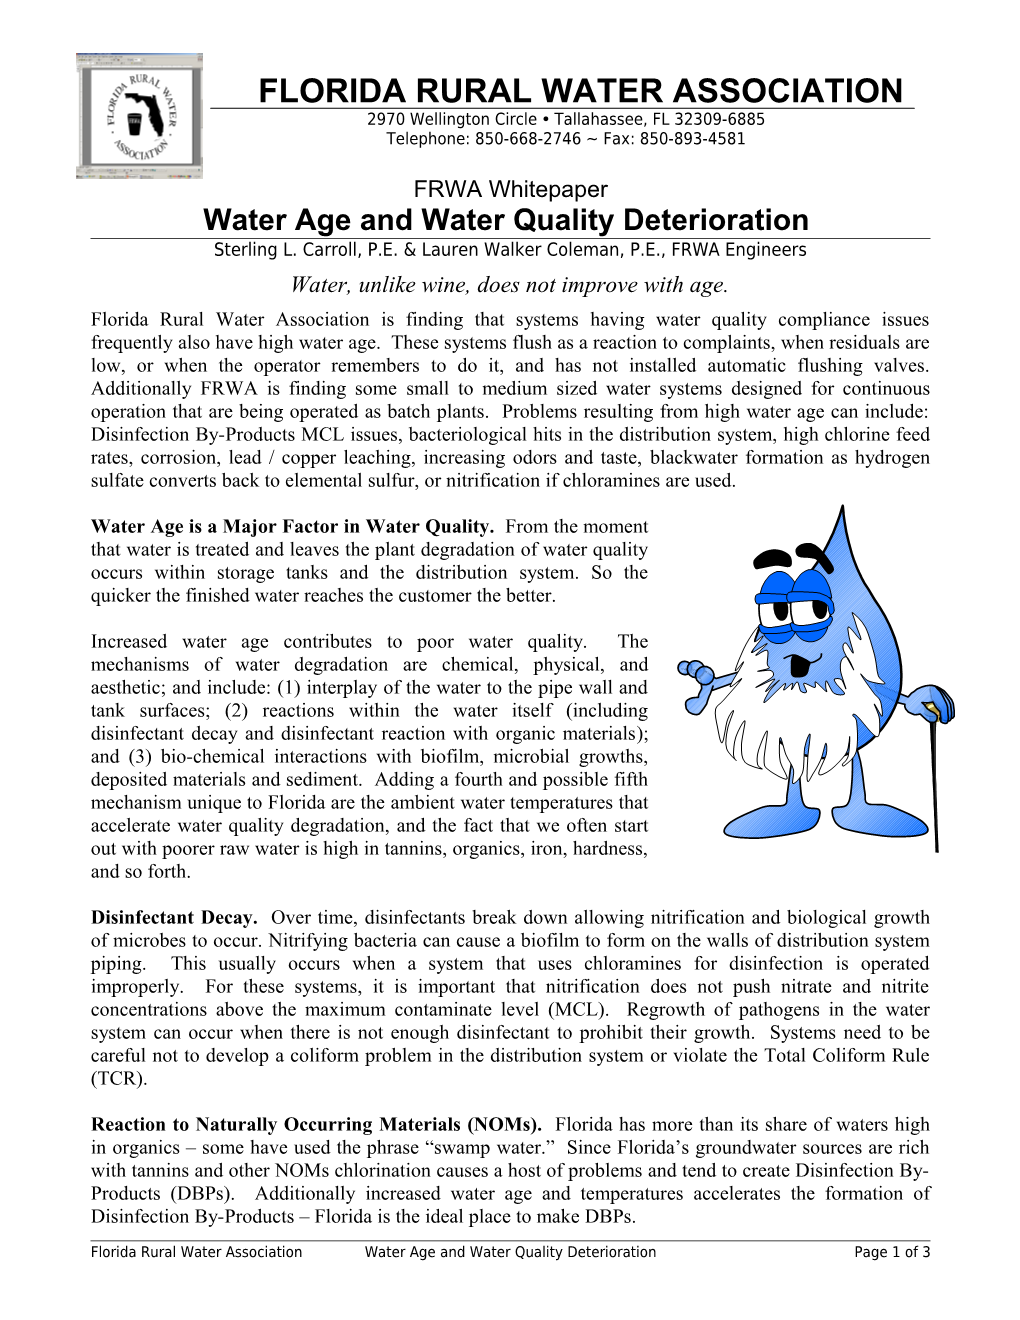 Water Age and Water Quality Deterioration